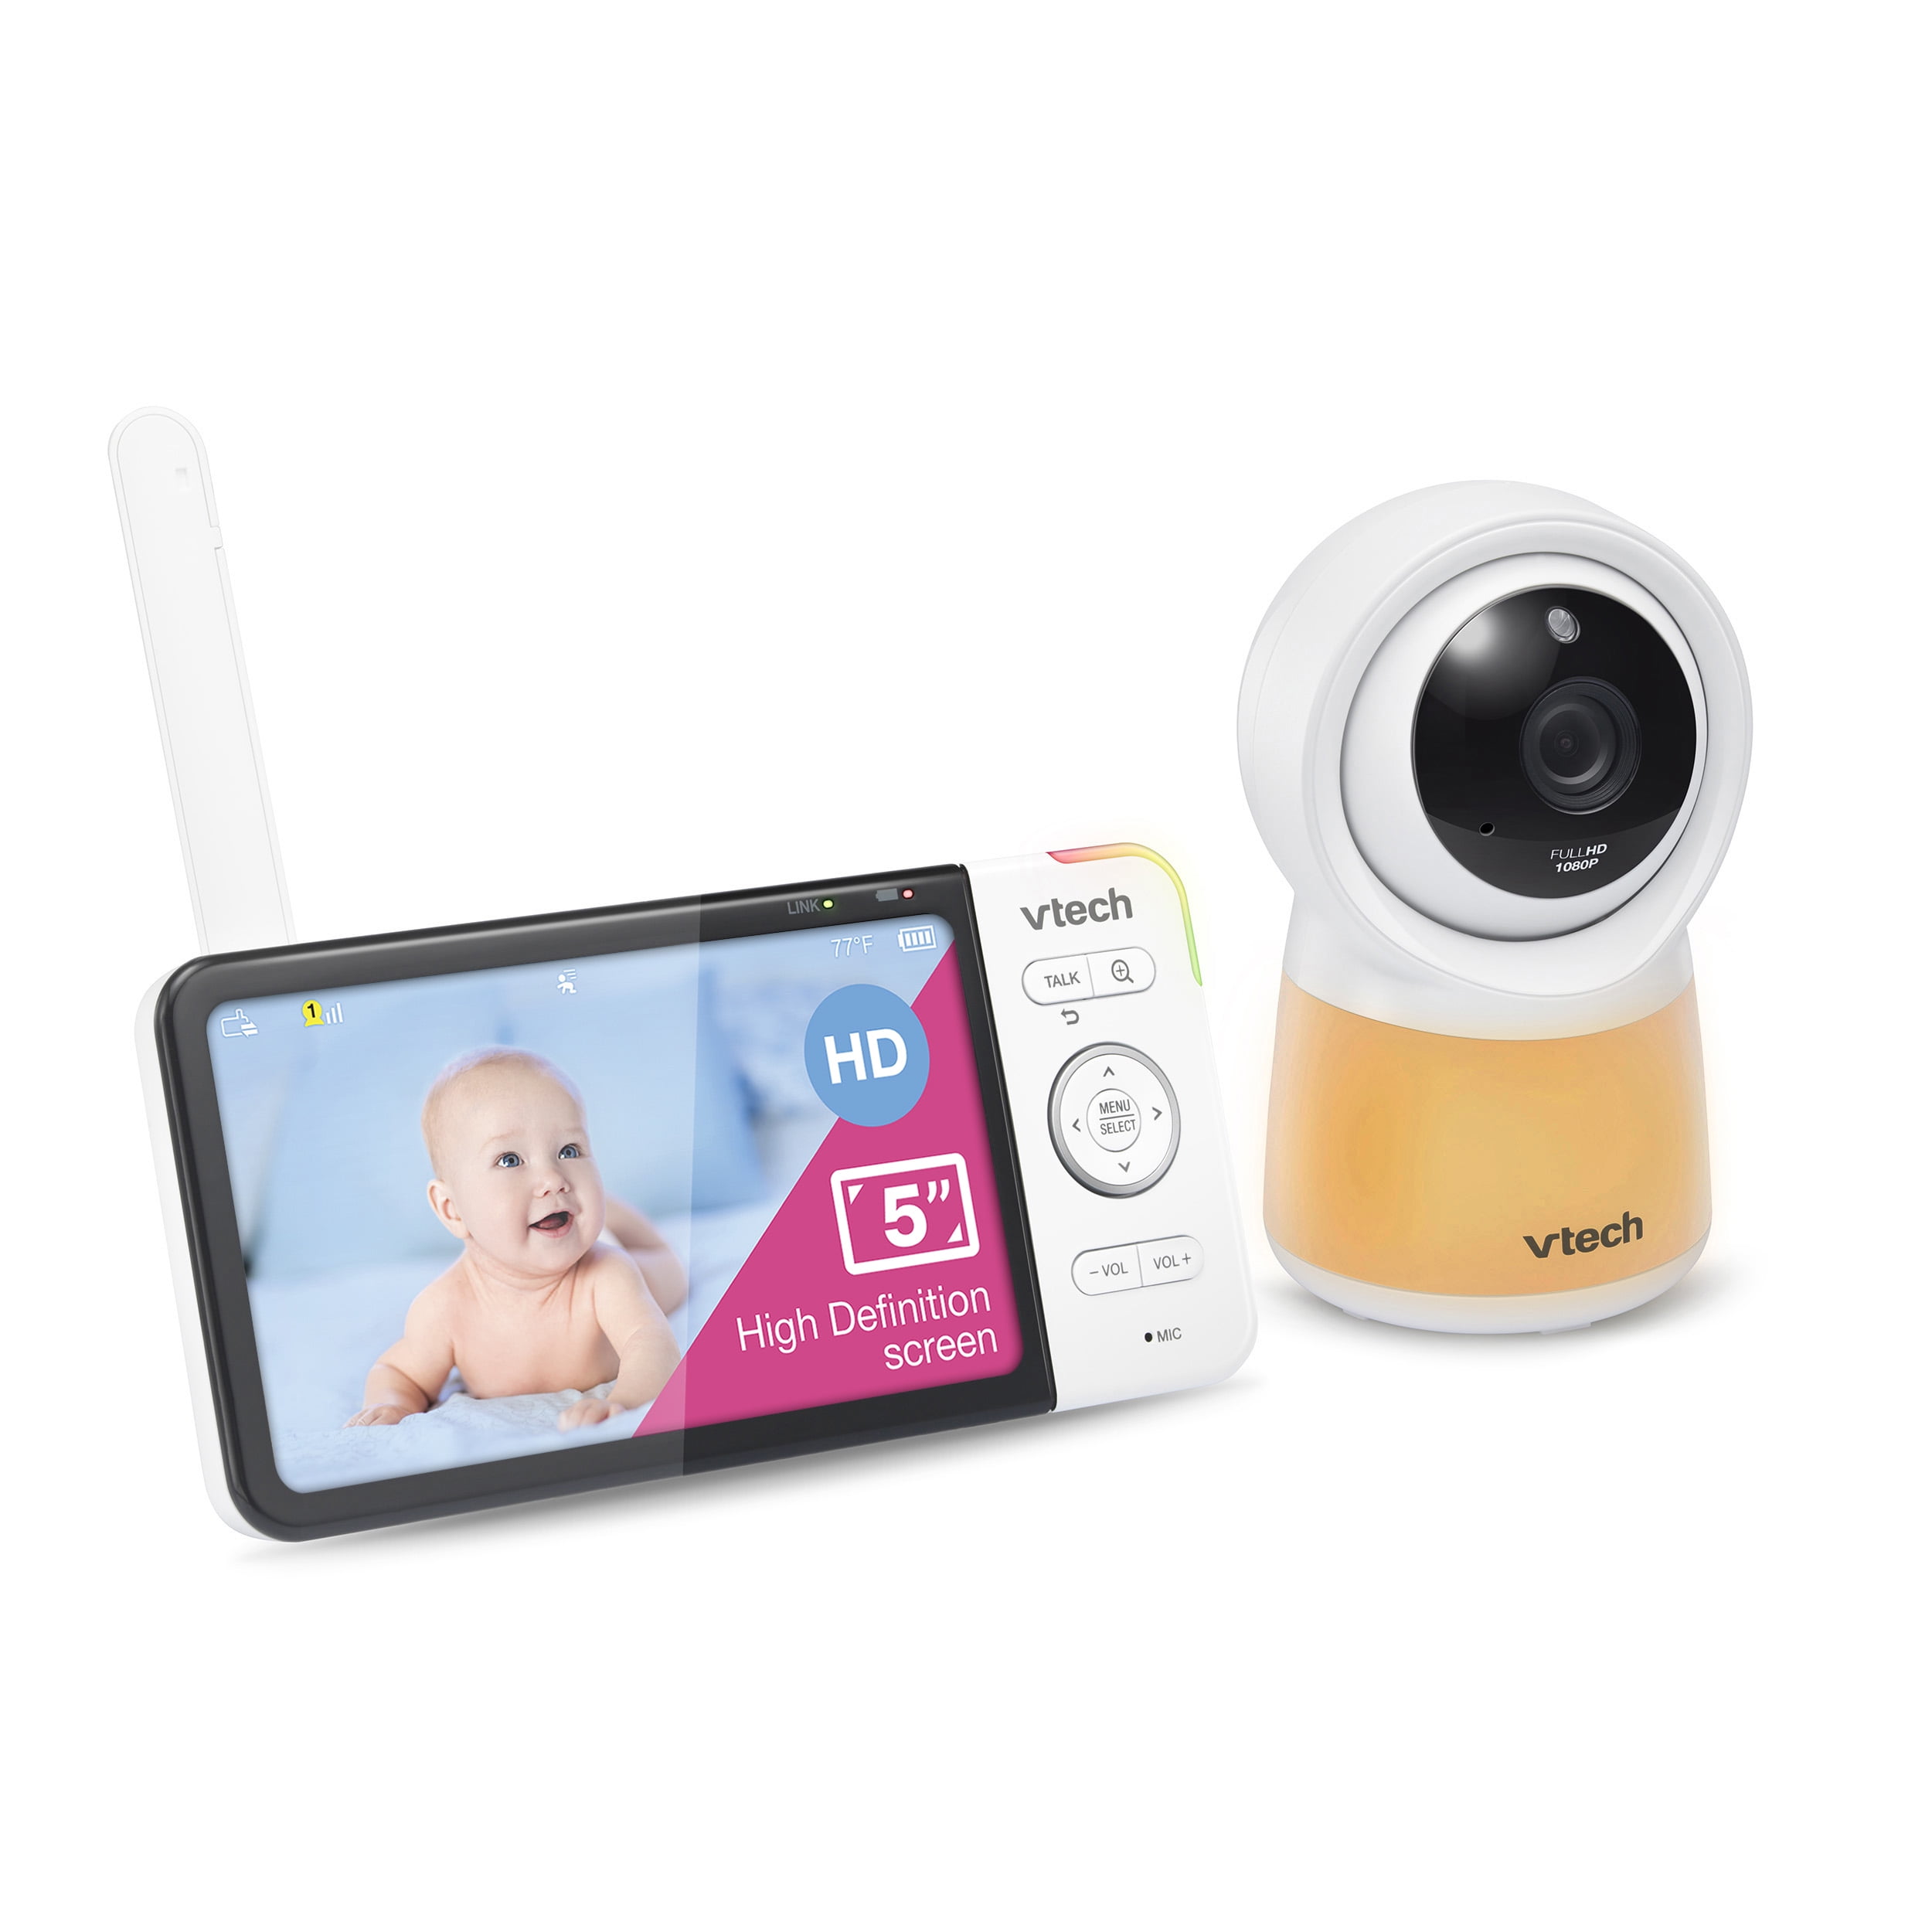 VTech Video & Audio Monitor BM7750HD with 2 Cameras, Audio & Video Baby  Monitors